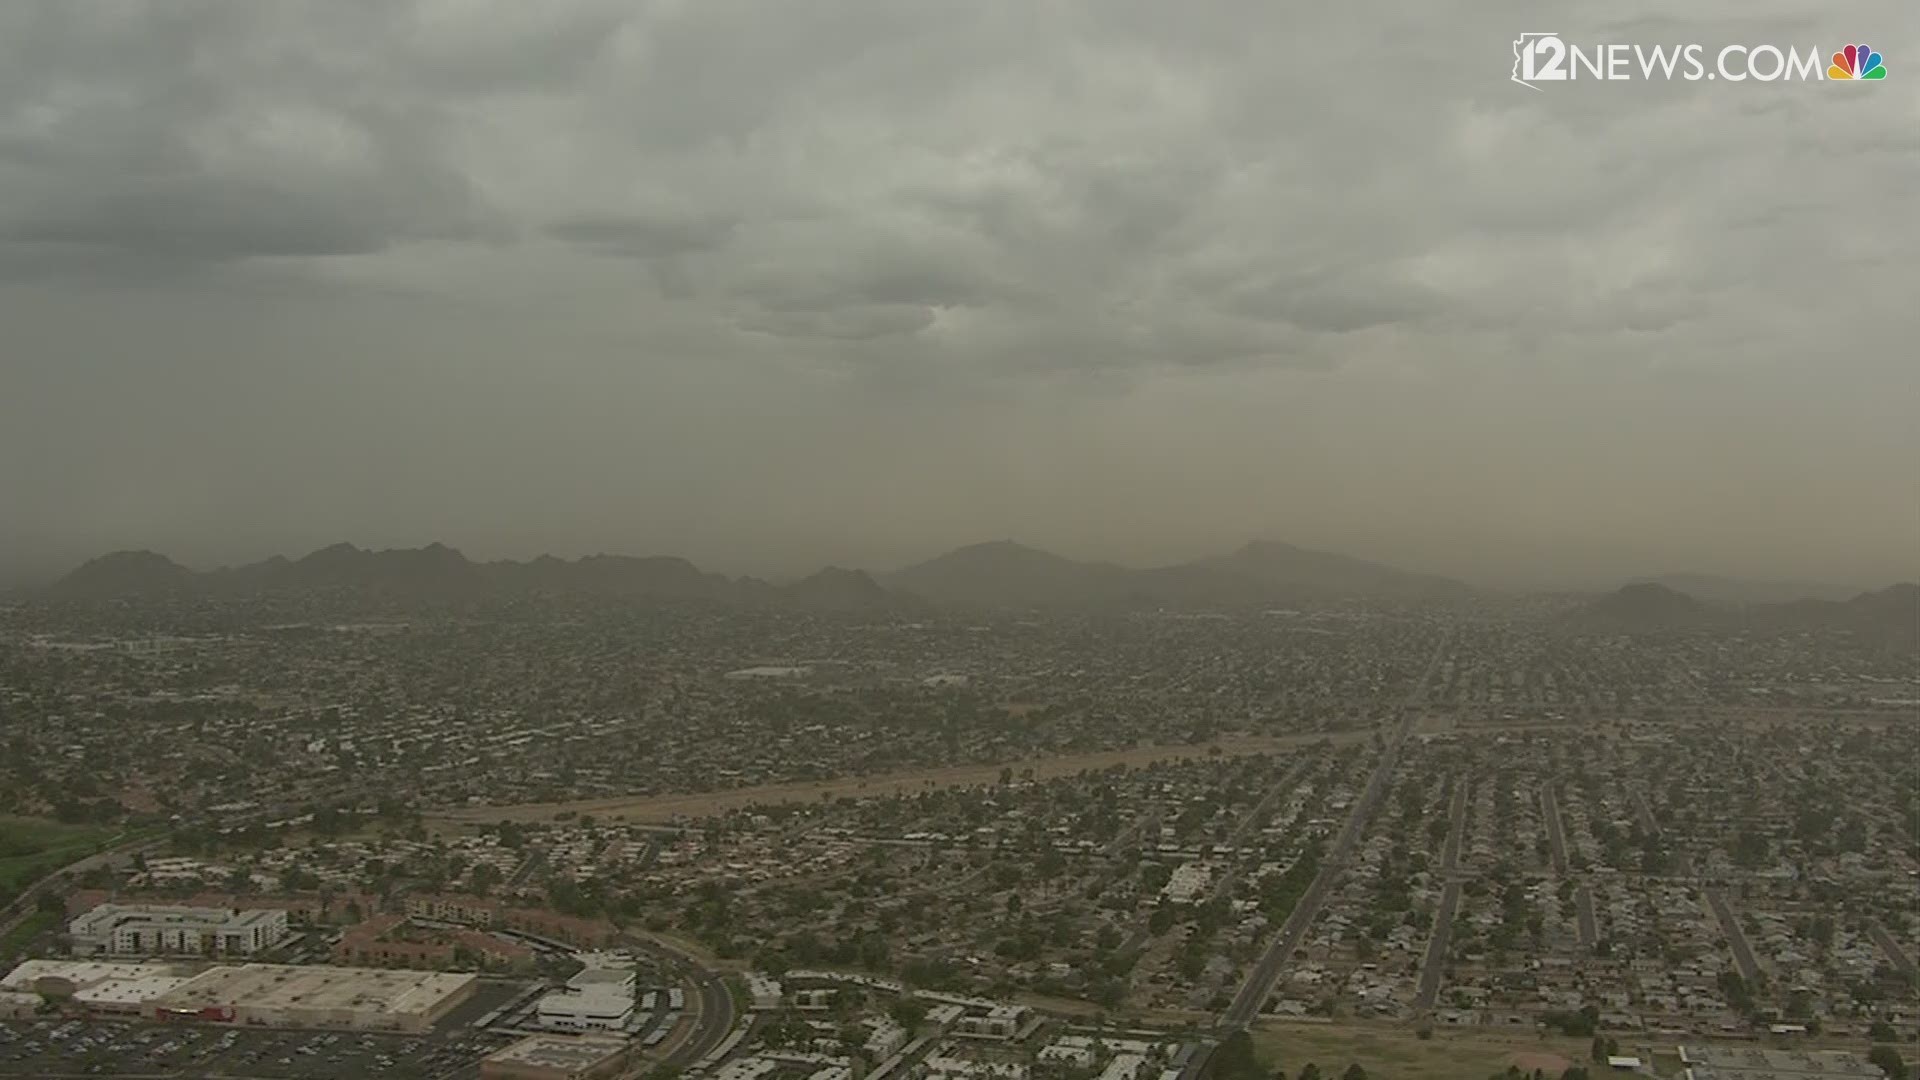 A November storm is moving into most parts of Arizona. Sky 12 captured dust and storm clouds moving into the Valley from Piestewa Peak Tuesday afternoon.